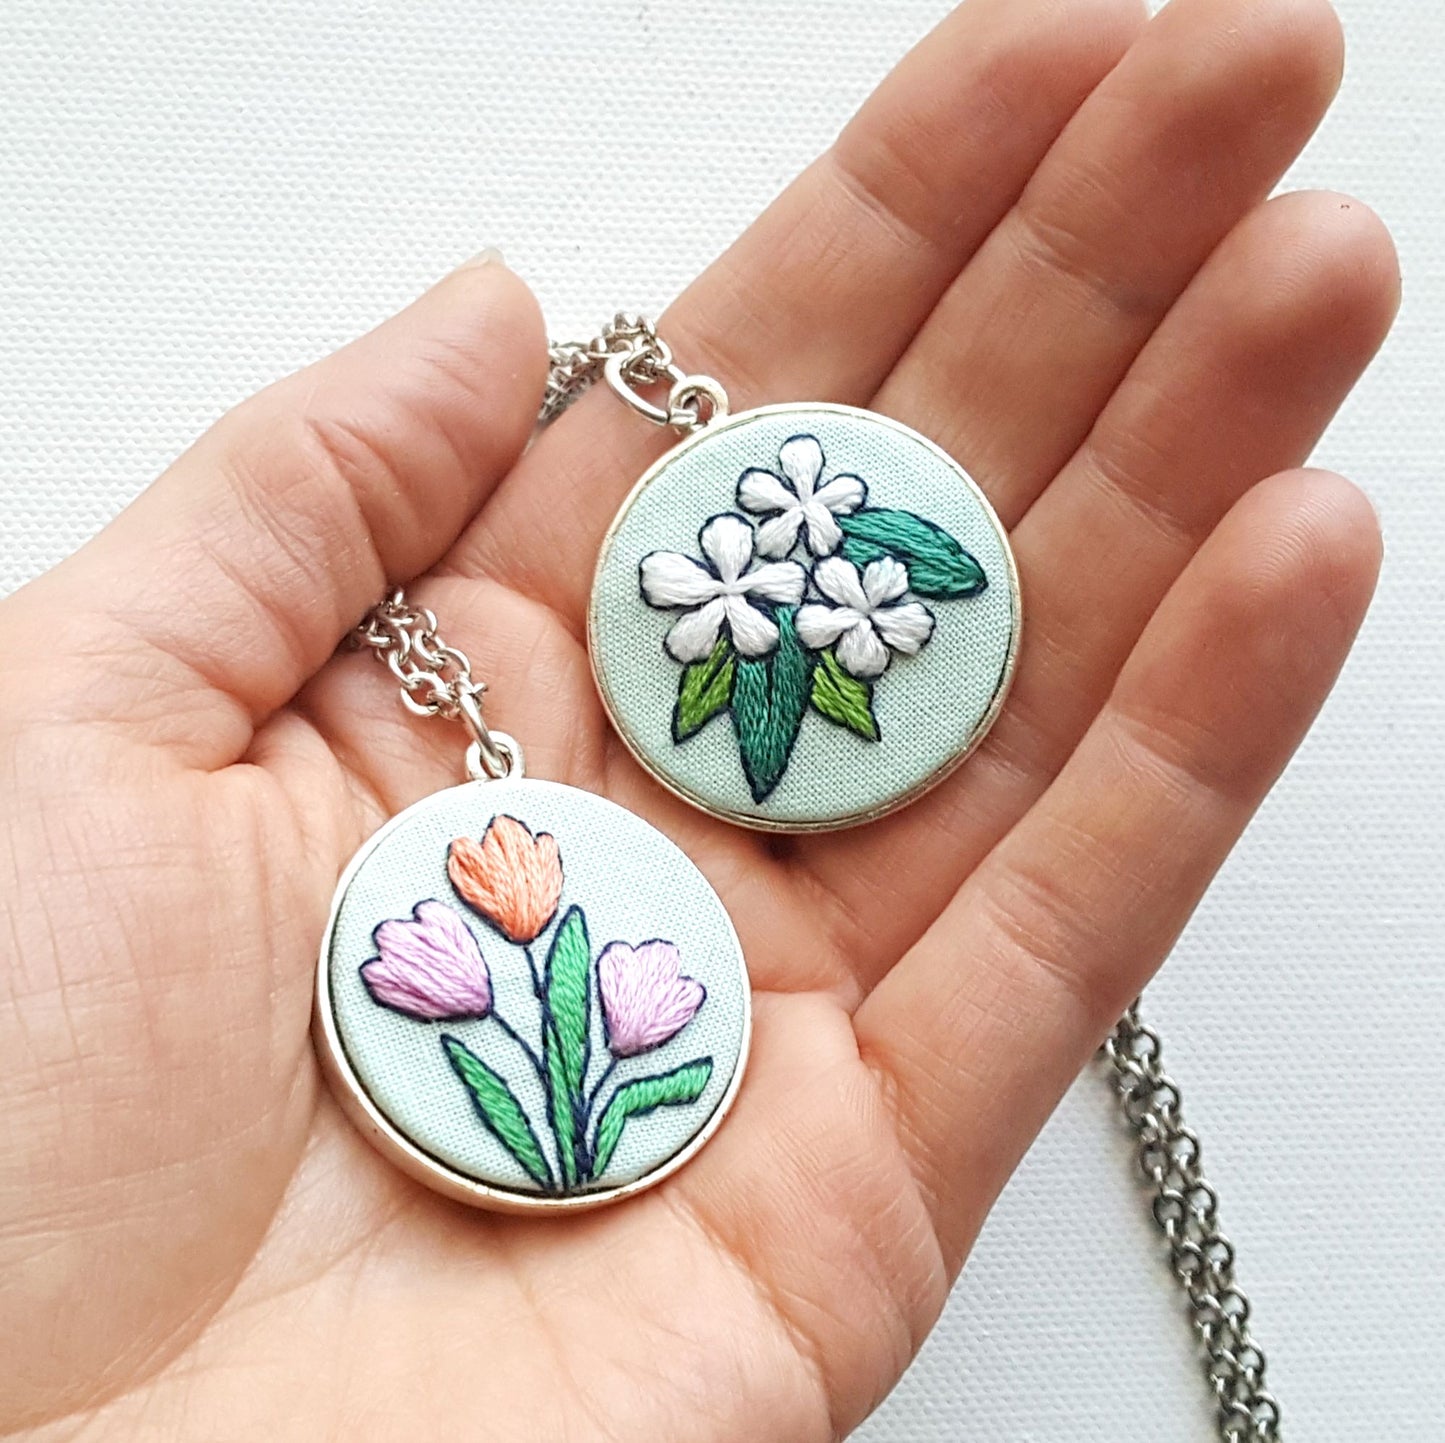 Fine Embroidered Jewelry Making: Necklace Sets